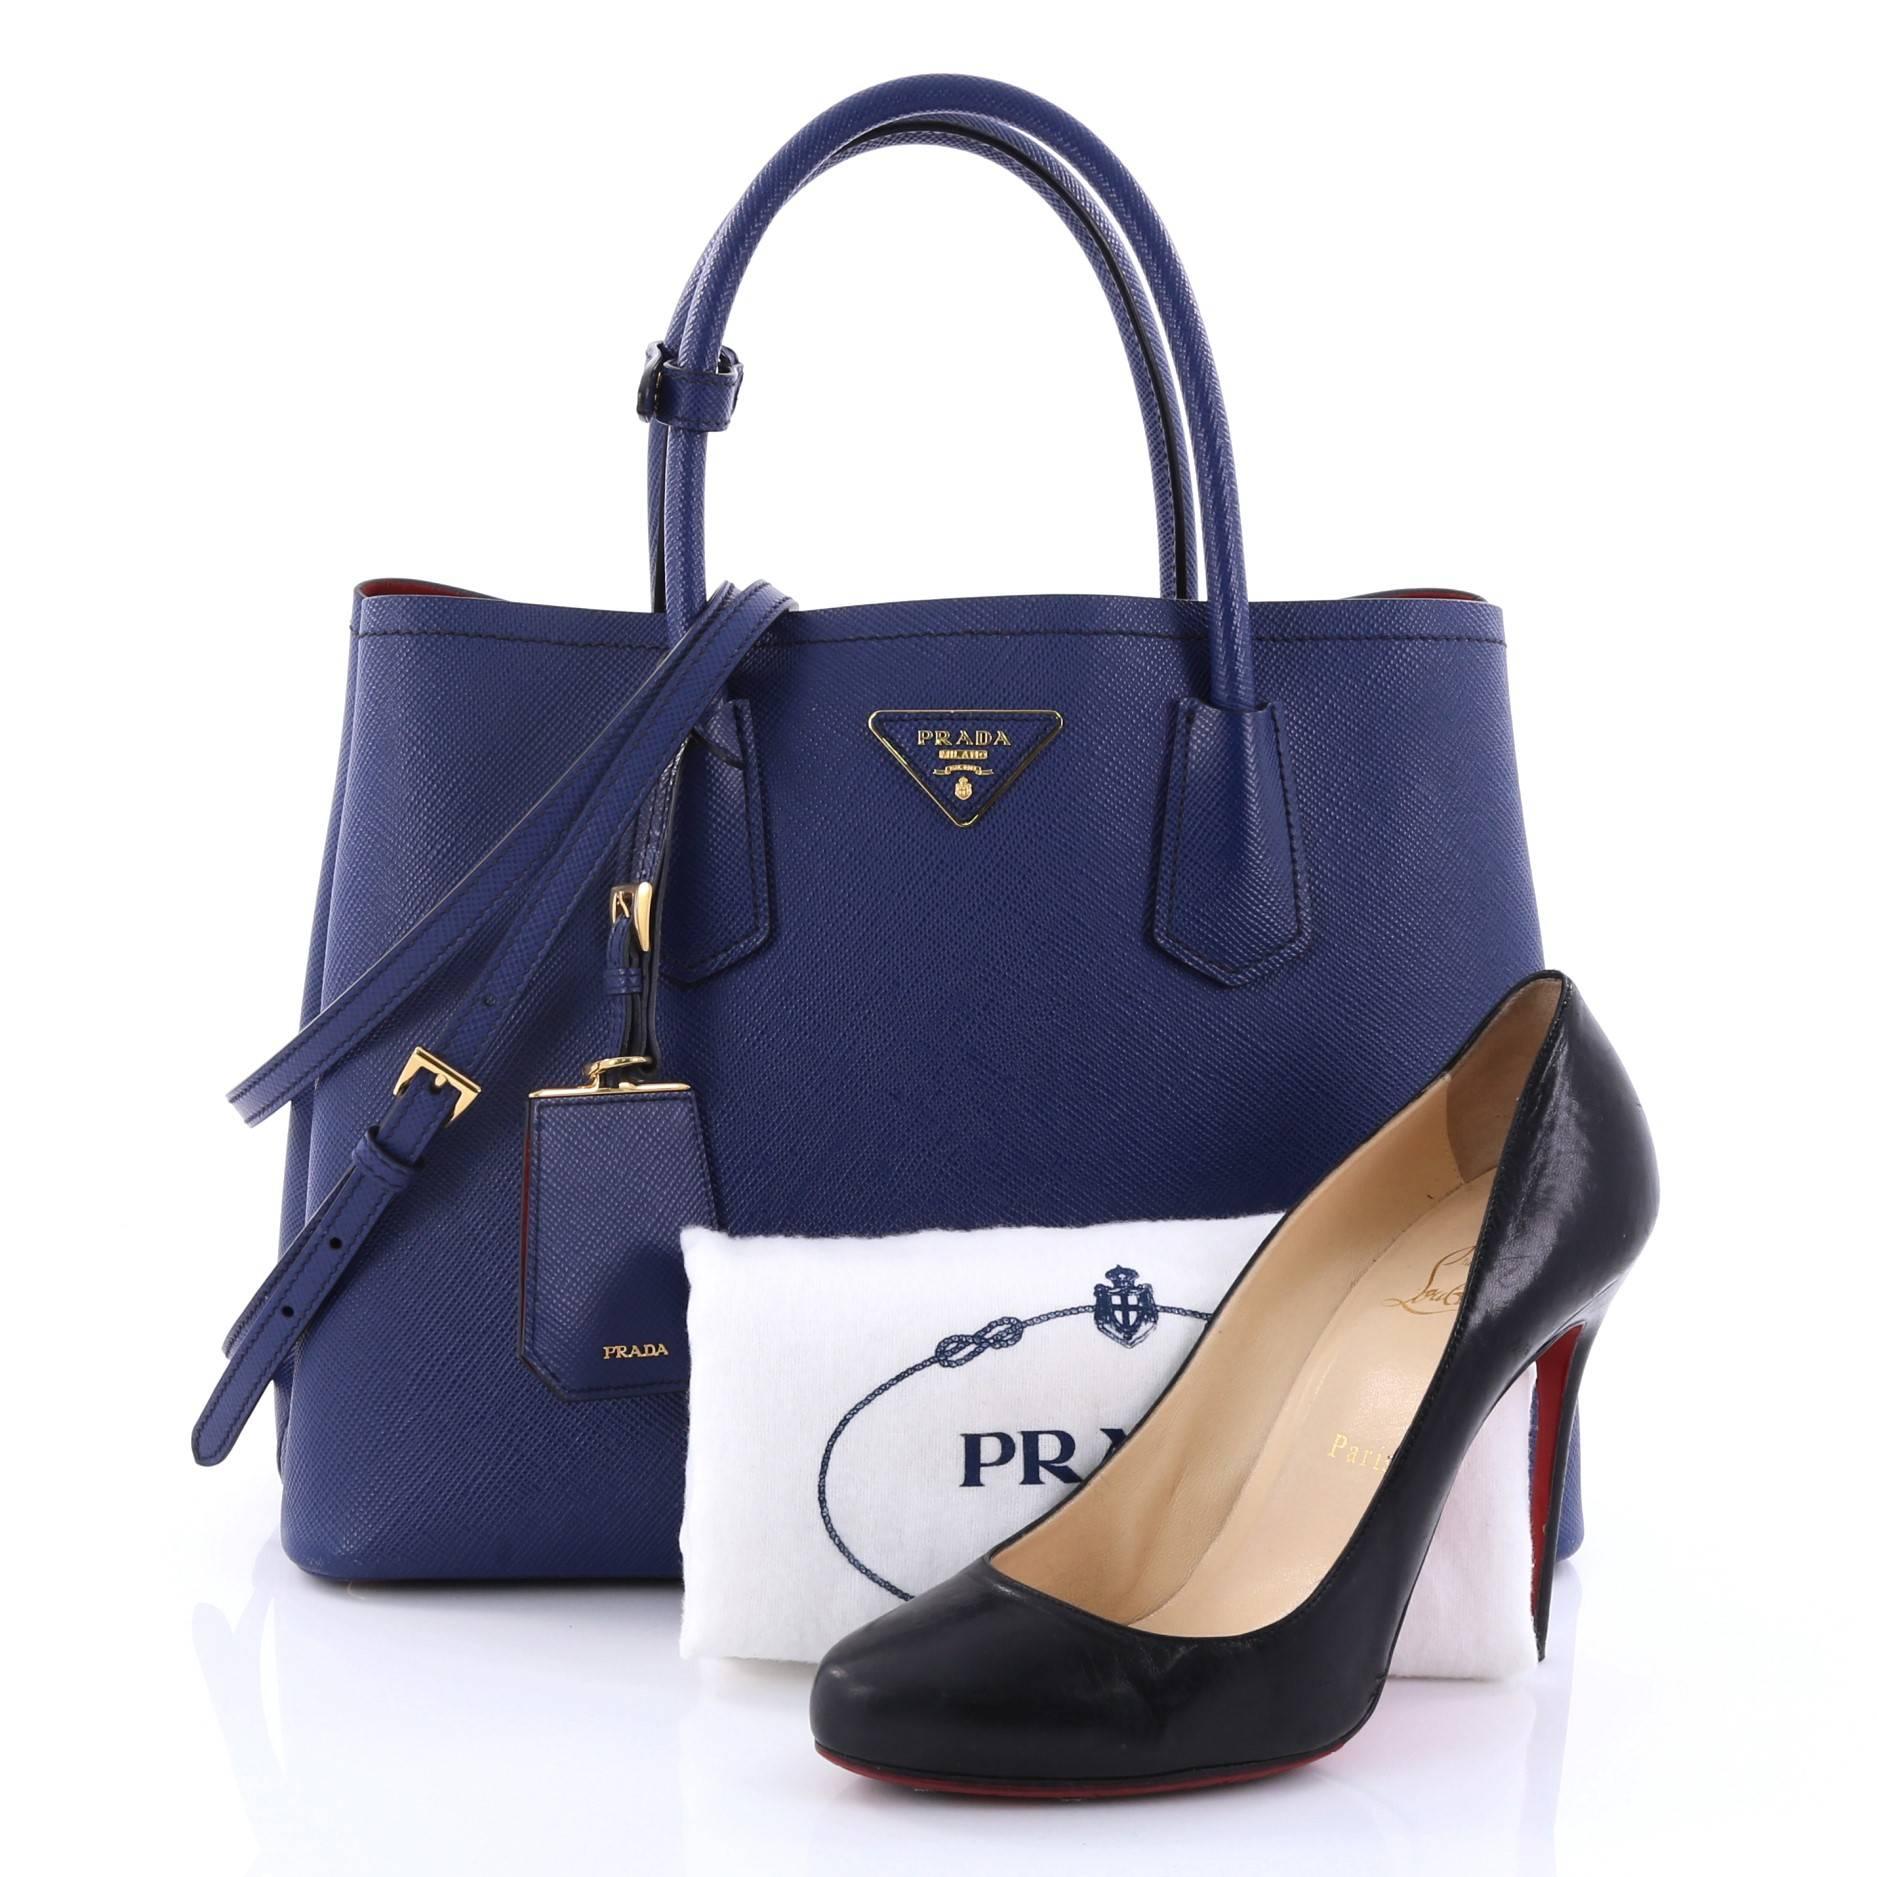 This authentic Prada Cuir Double Tote Saffiano Leather Medium is elegant in its simplicity and structure. Crafted from sturdy blue saffiano leather, this tote features dual-rolled handles, side snap buttons, Prada's trademark triangle logo at the